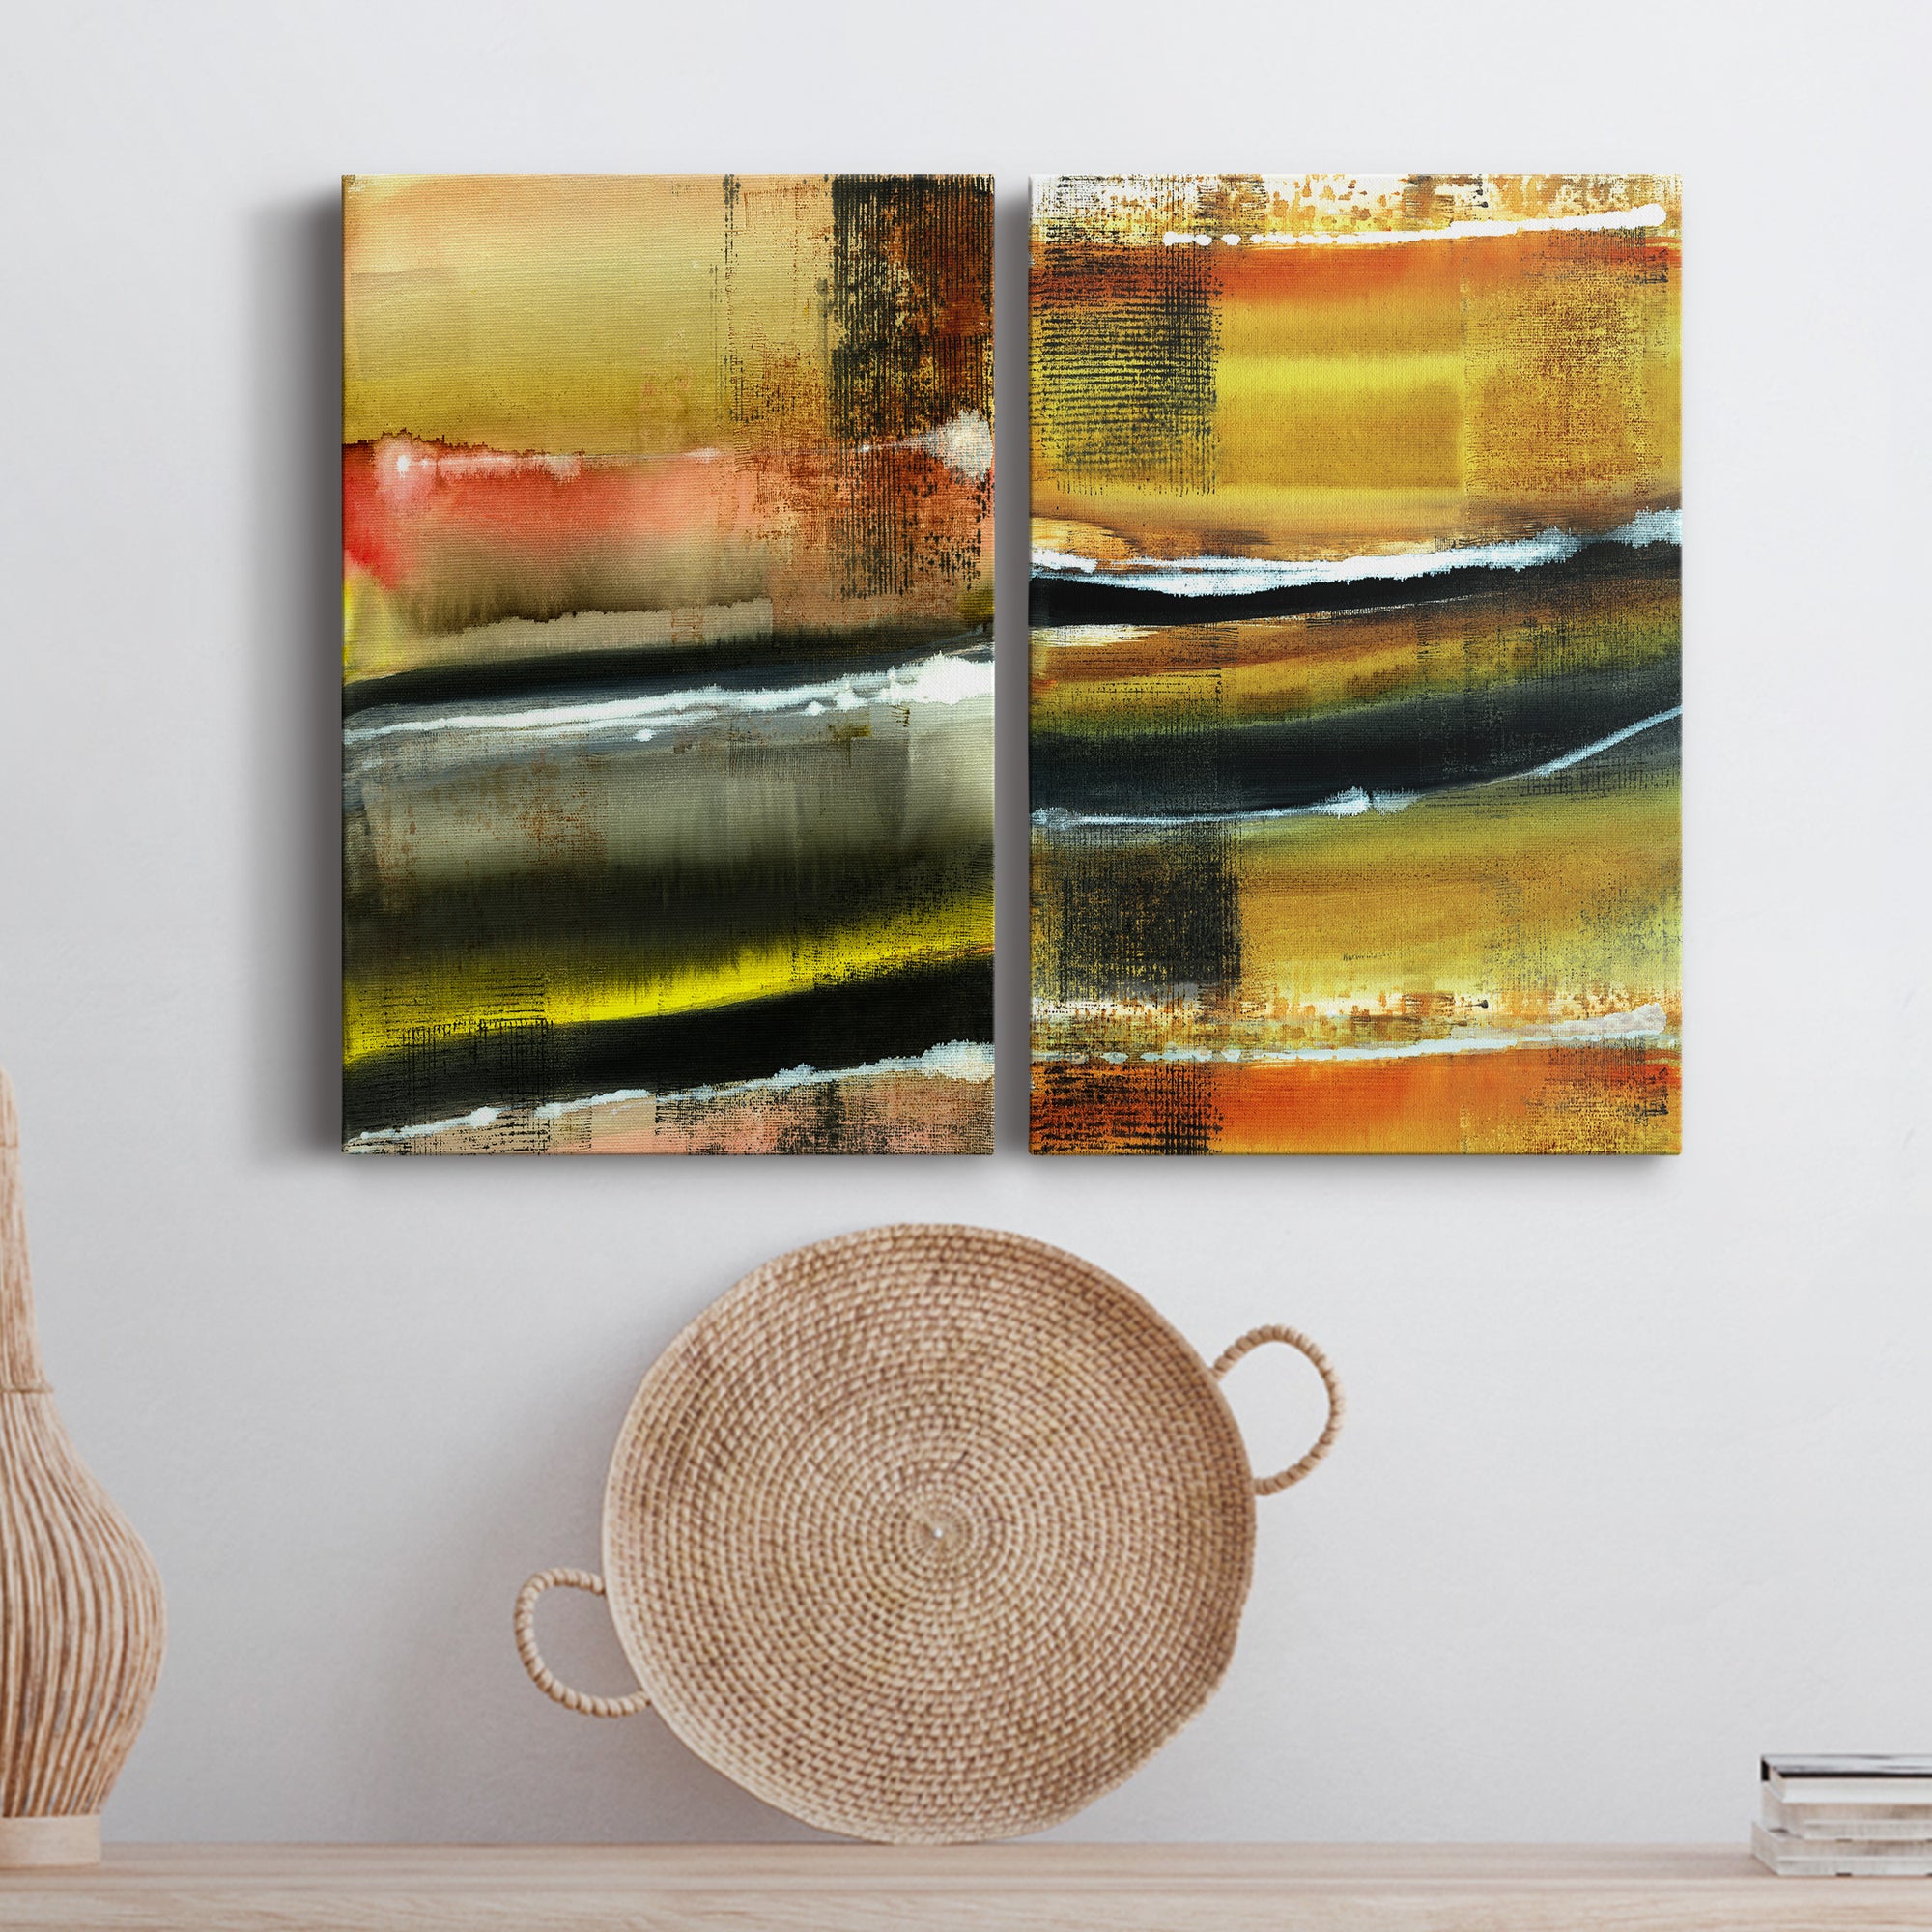 Desert Night I Premium Gallery Wrapped Canvas - Ready to Hang - Set of 2 - 8 x 12 Each